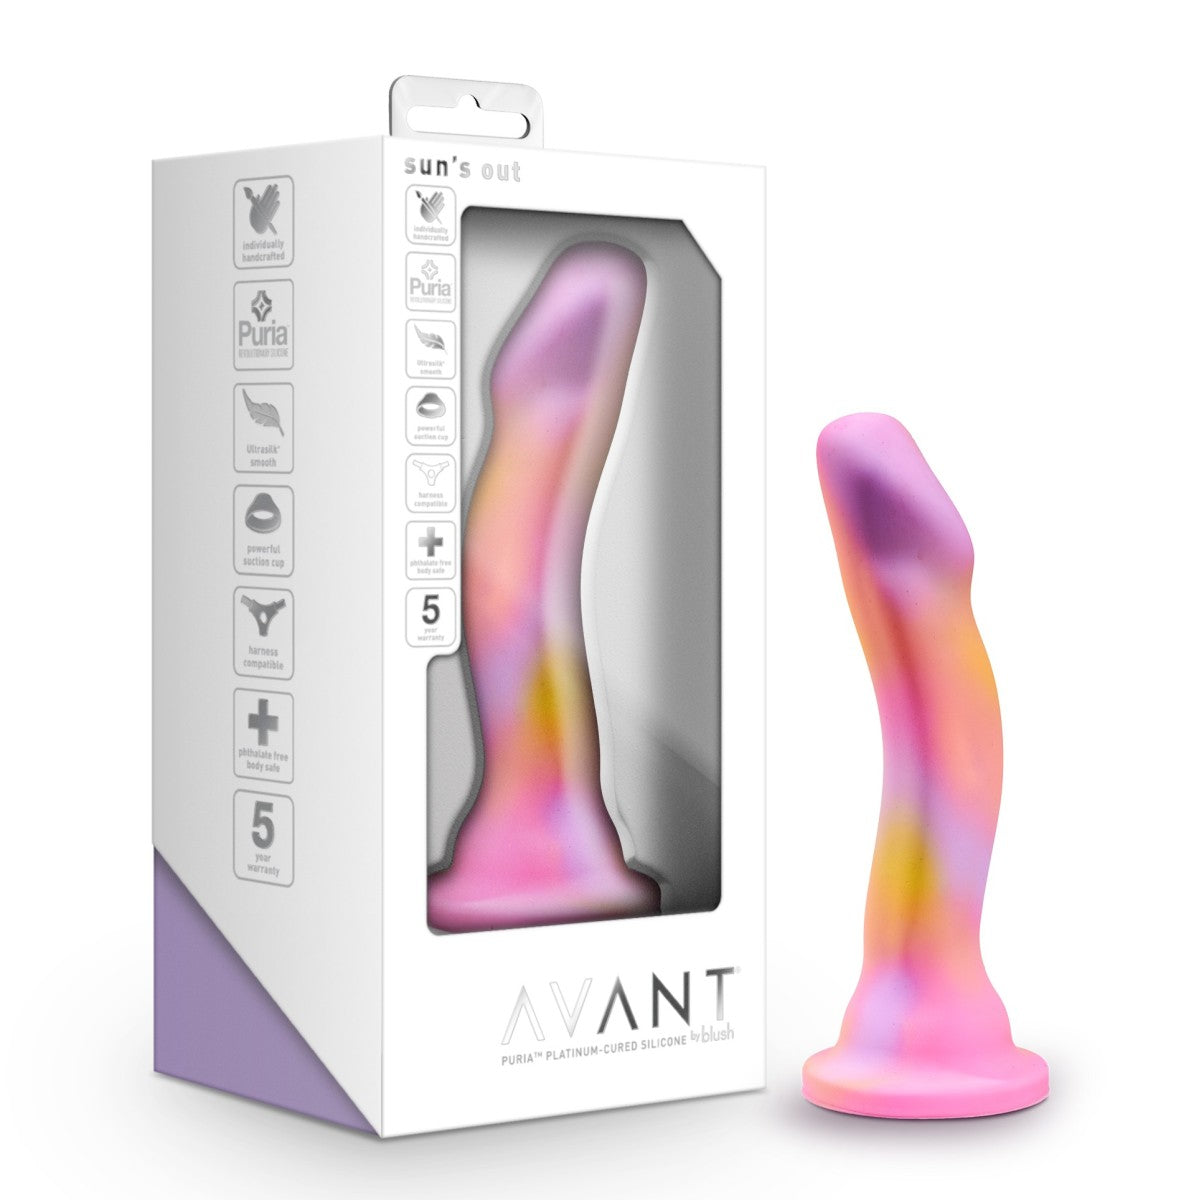 Blush Avant | Sun's Out Pink: Artisan 7 Inch Curved P-Spot / G-Spot Dildo with Suction Cup Base